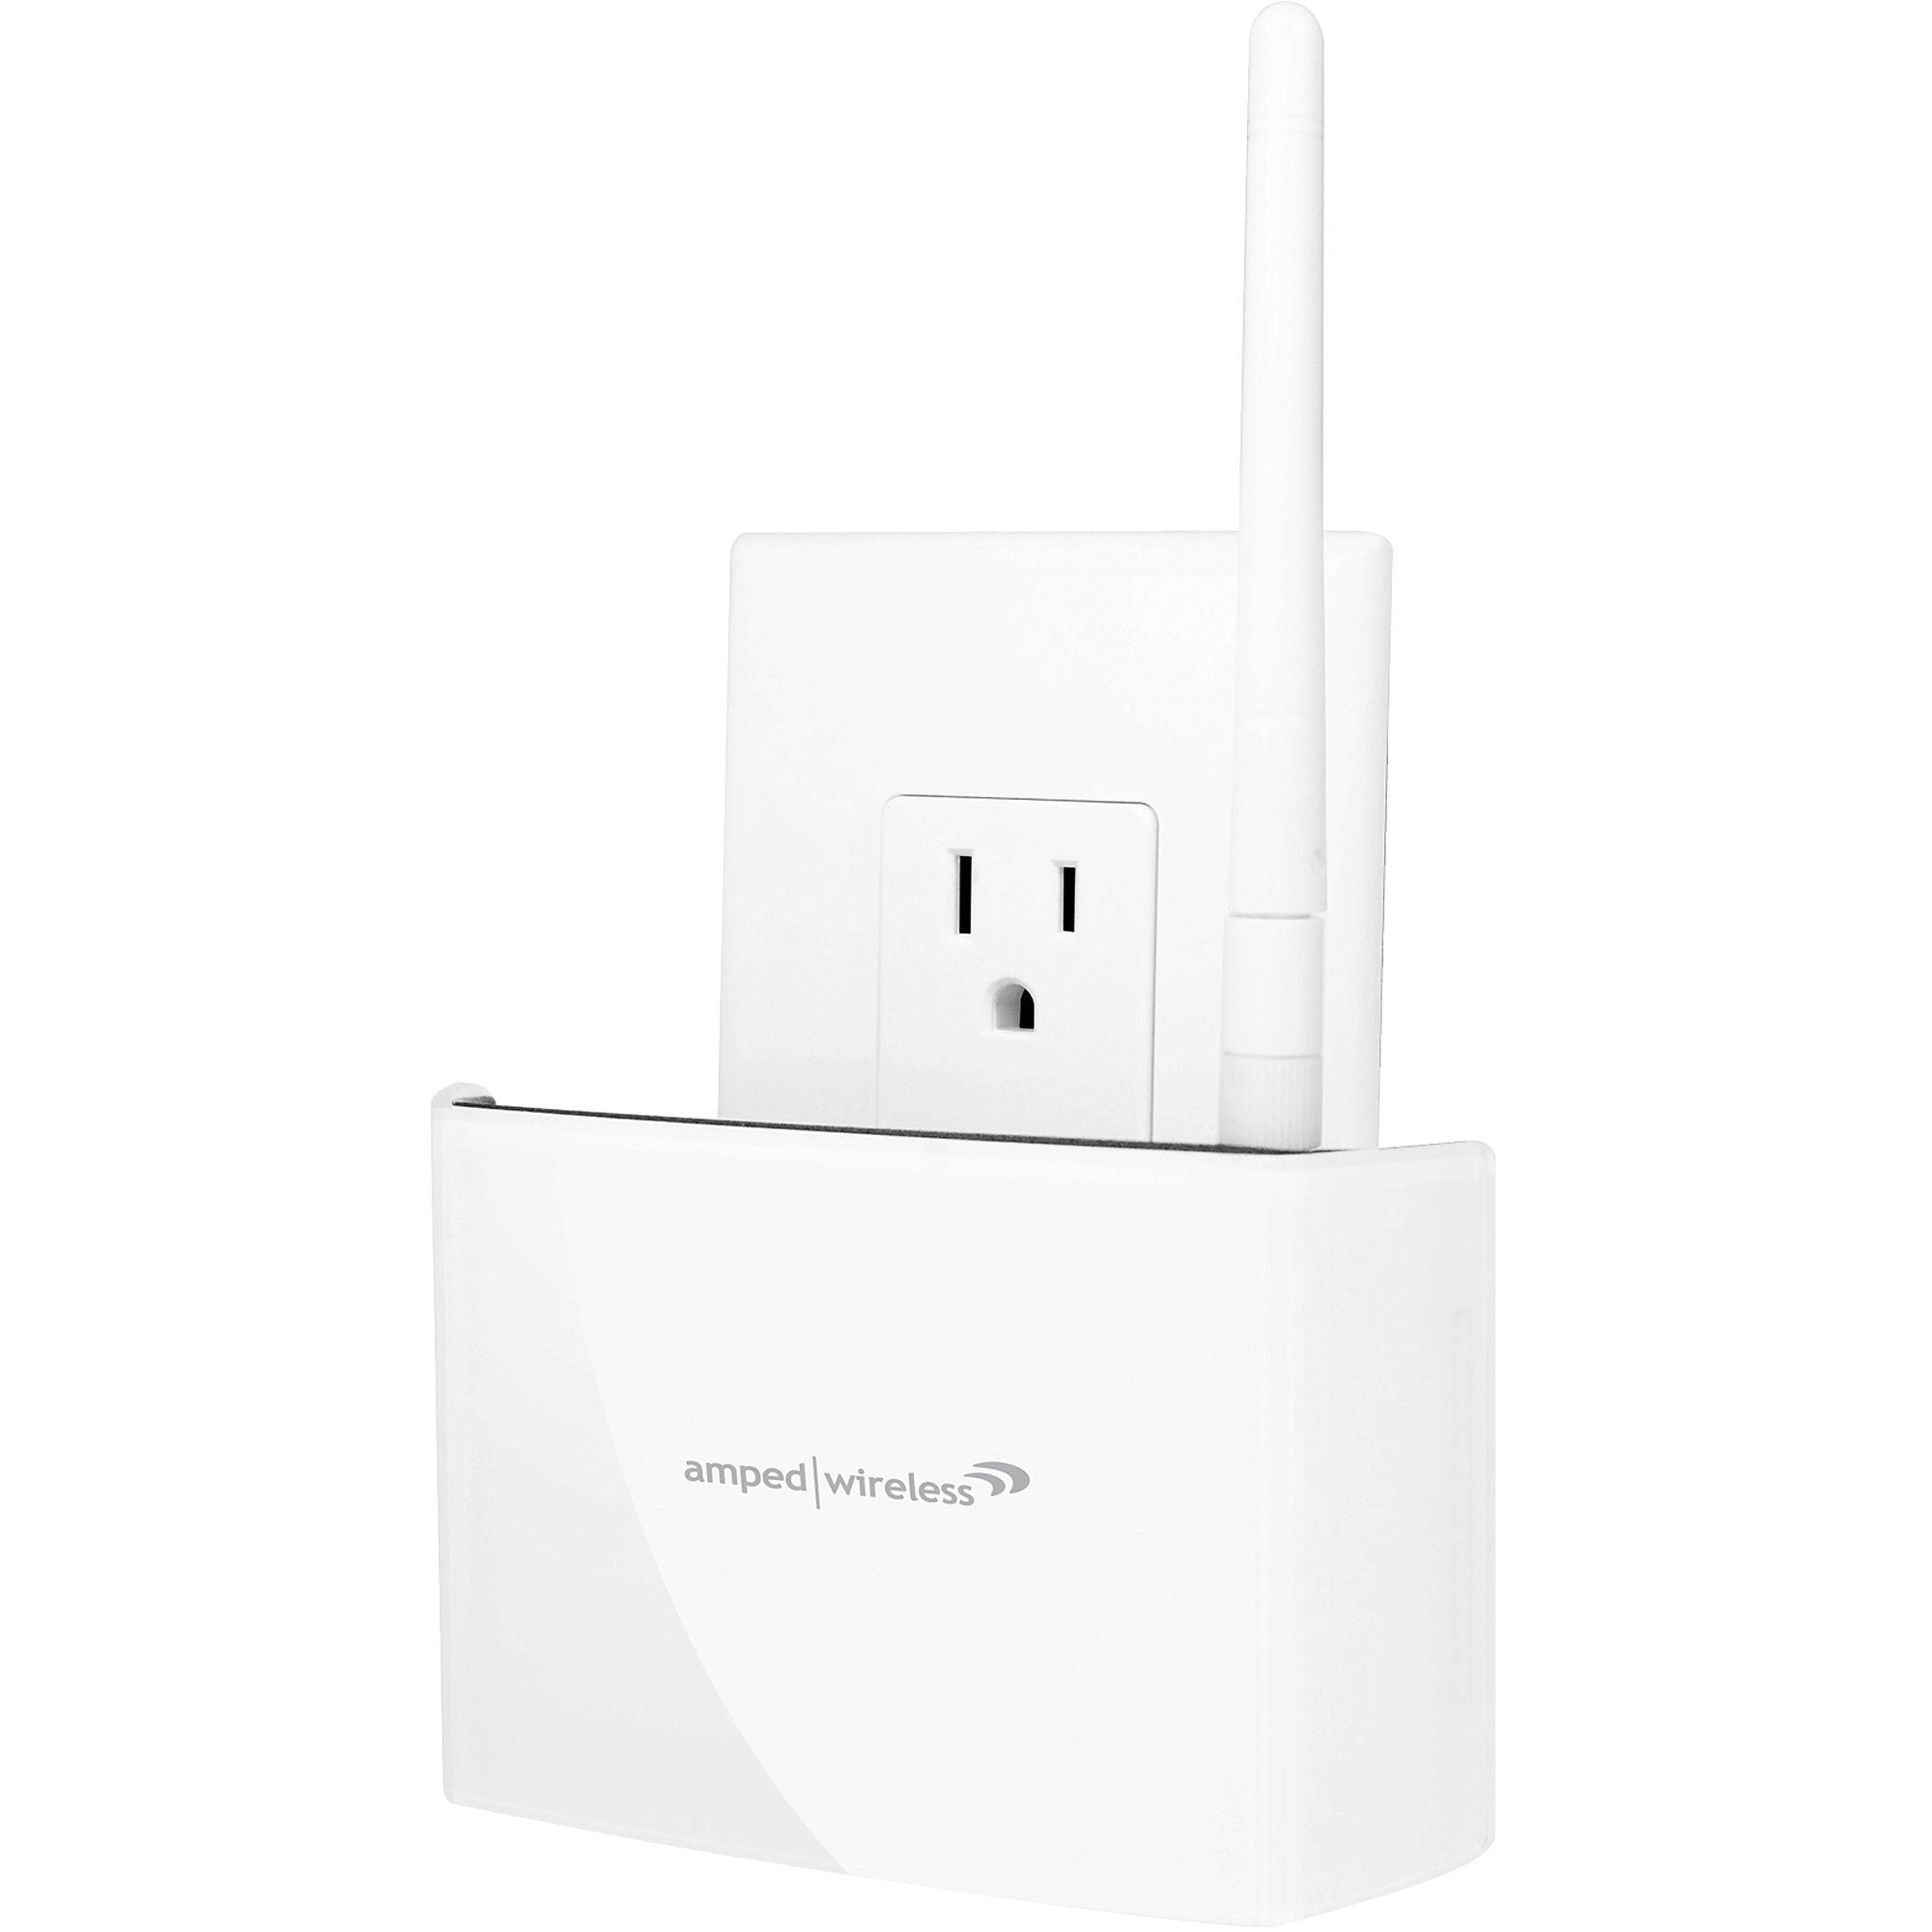 Amped Wireless High Power Compact 802.11ac Wi-Fi Range Extender, REC15A